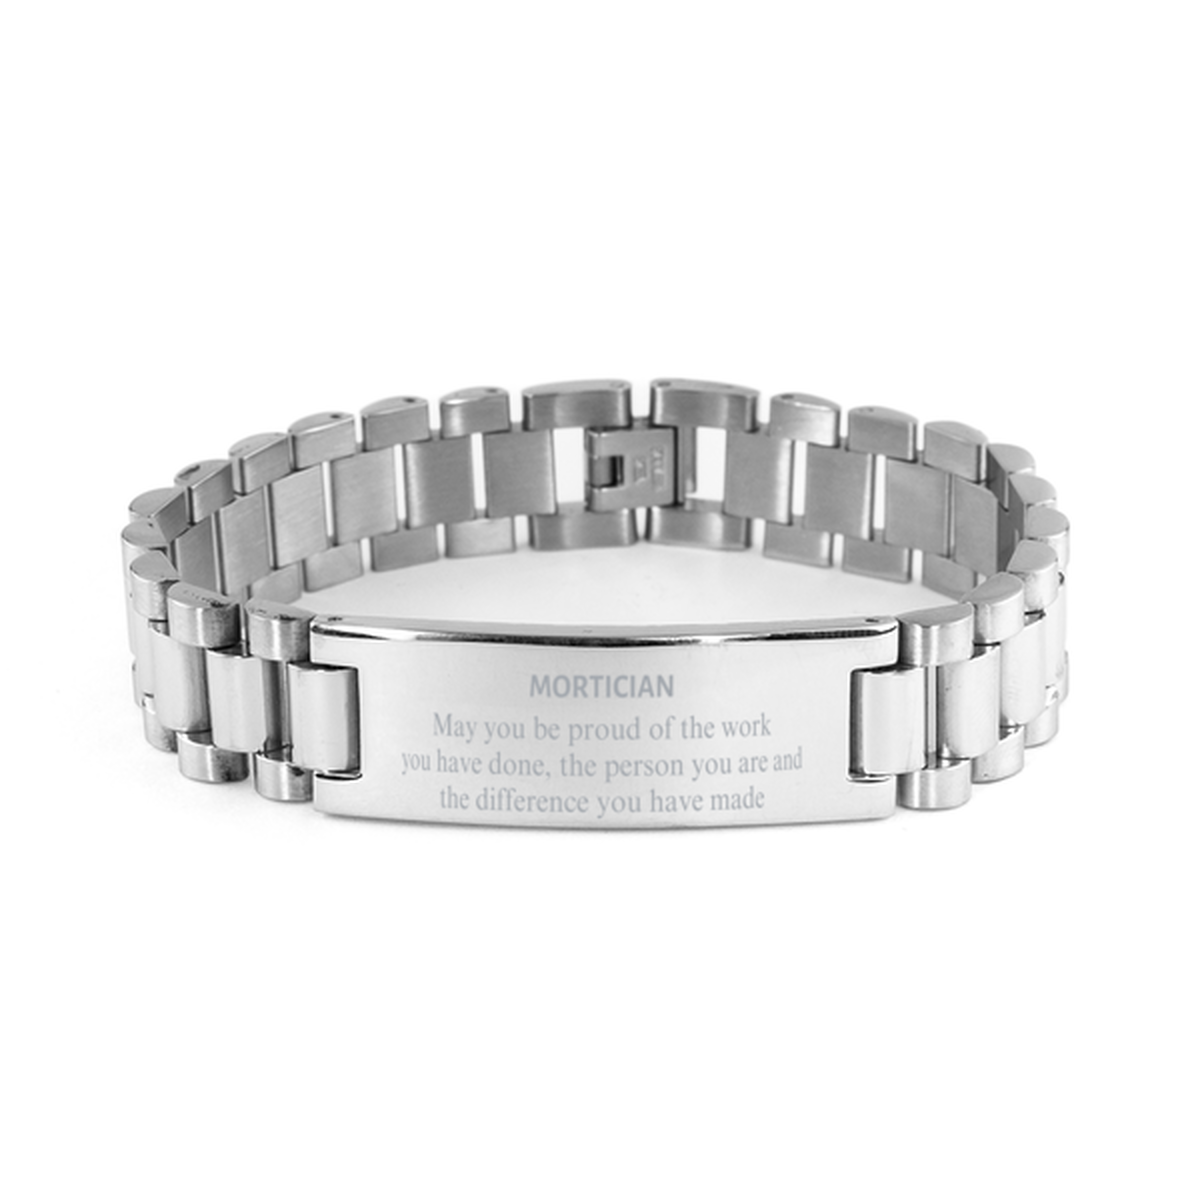 Mortician May you be proud of the work you have done, Retirement Mortician Ladder Stainless Steel Bracelet for Colleague Appreciation Gifts Amazing for Mortician